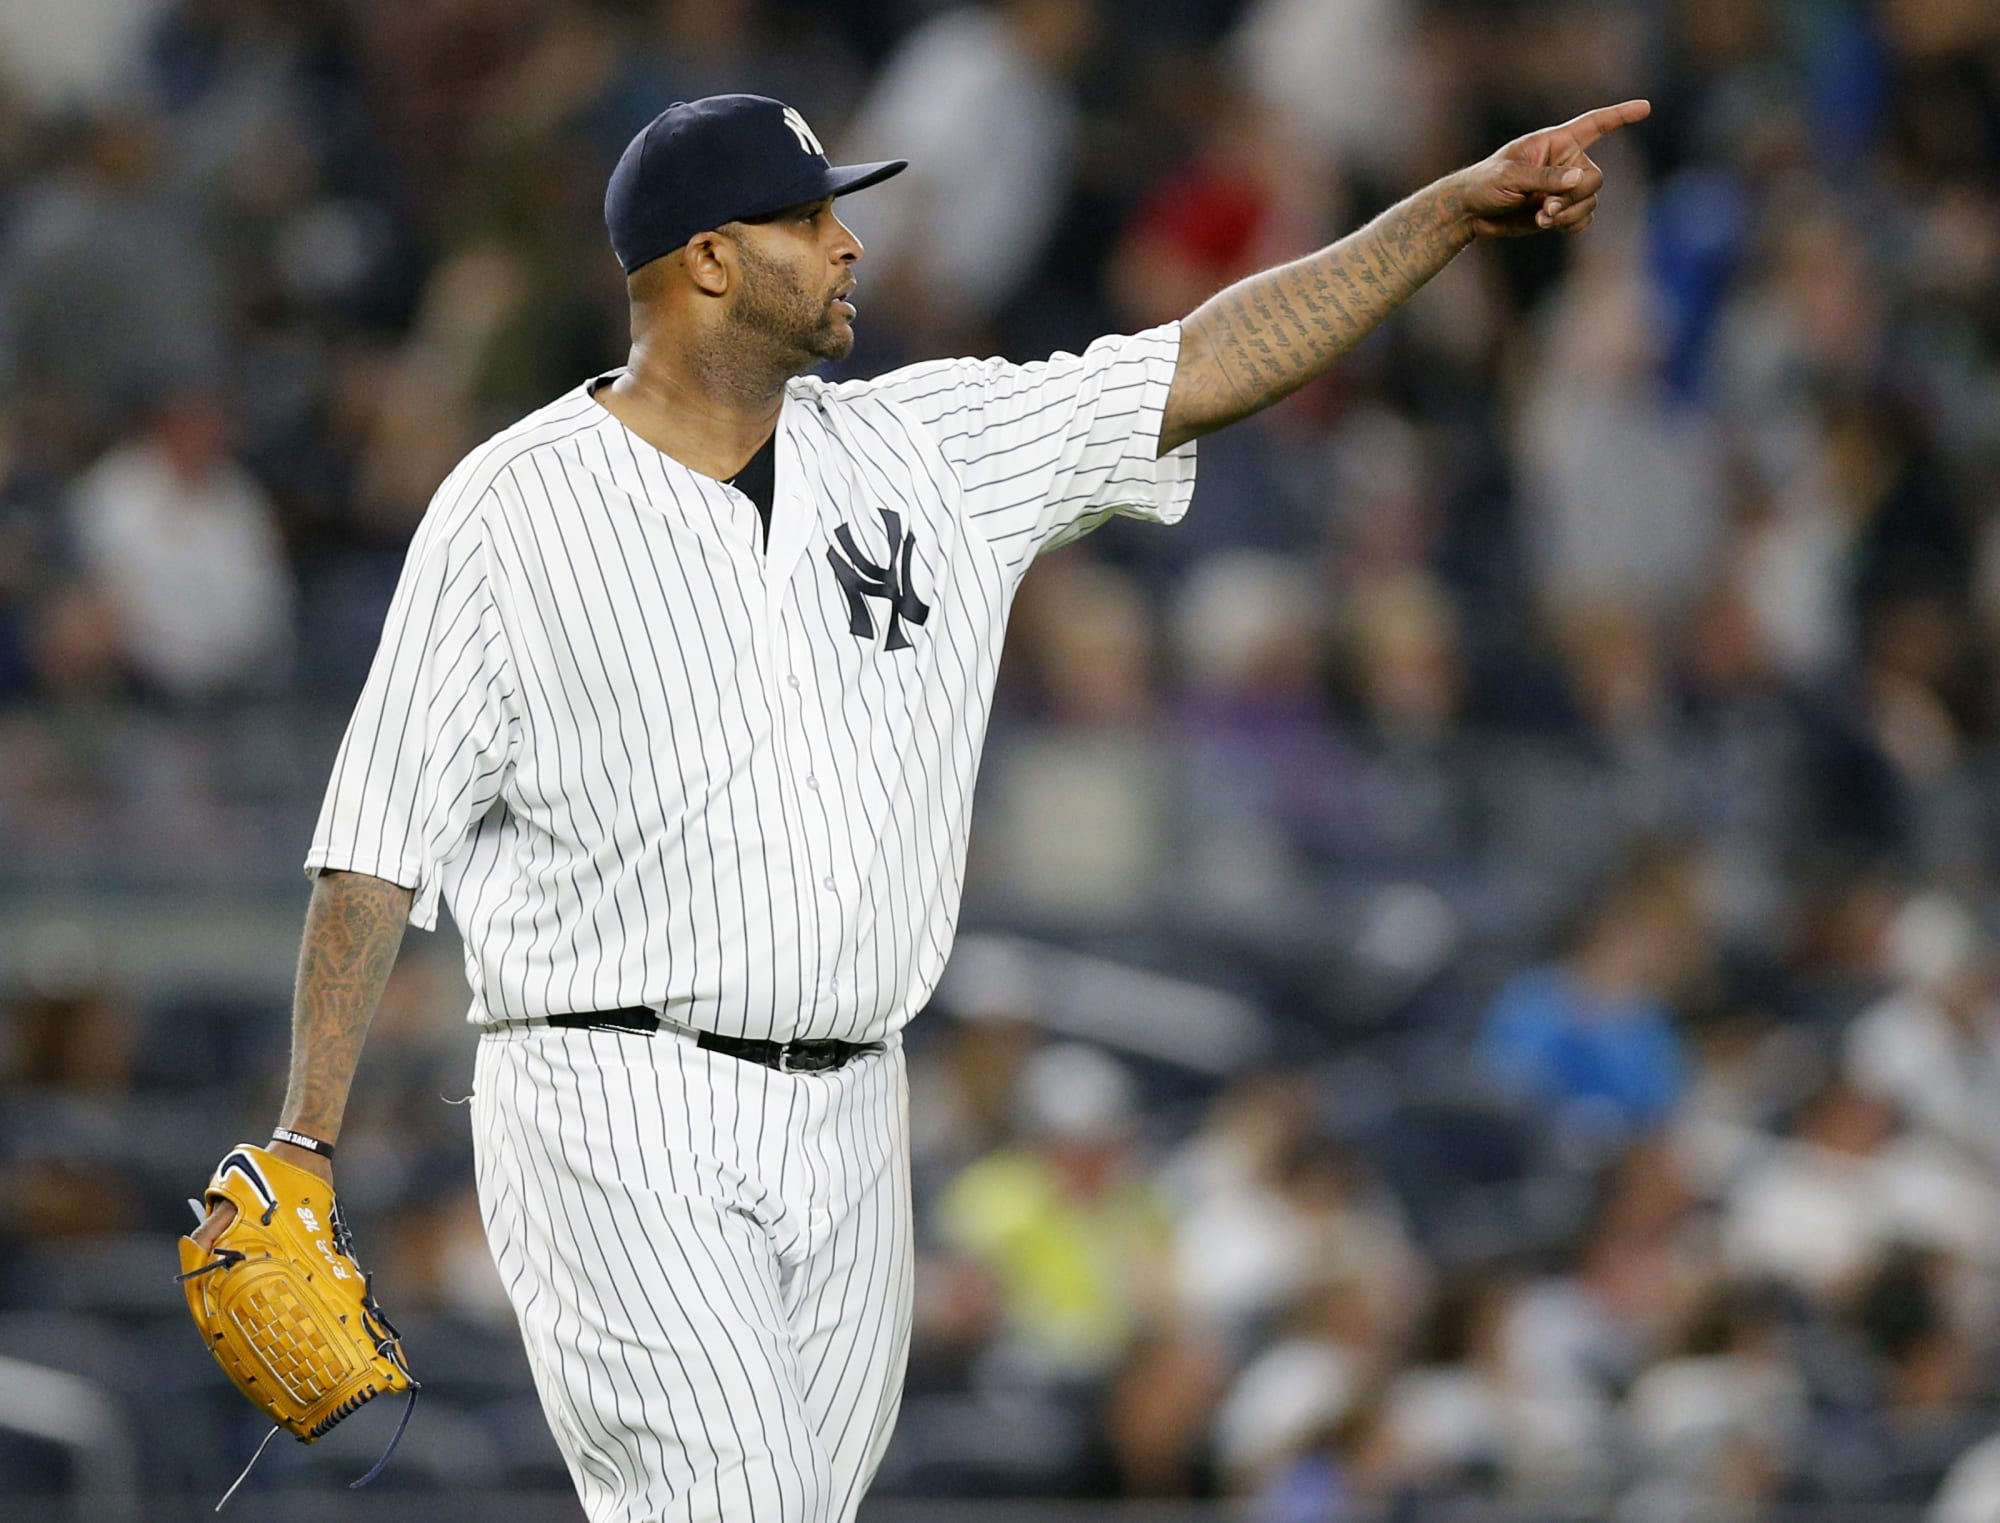 Yankees pitcher CC Sabathia ejected from game, two innings shy of